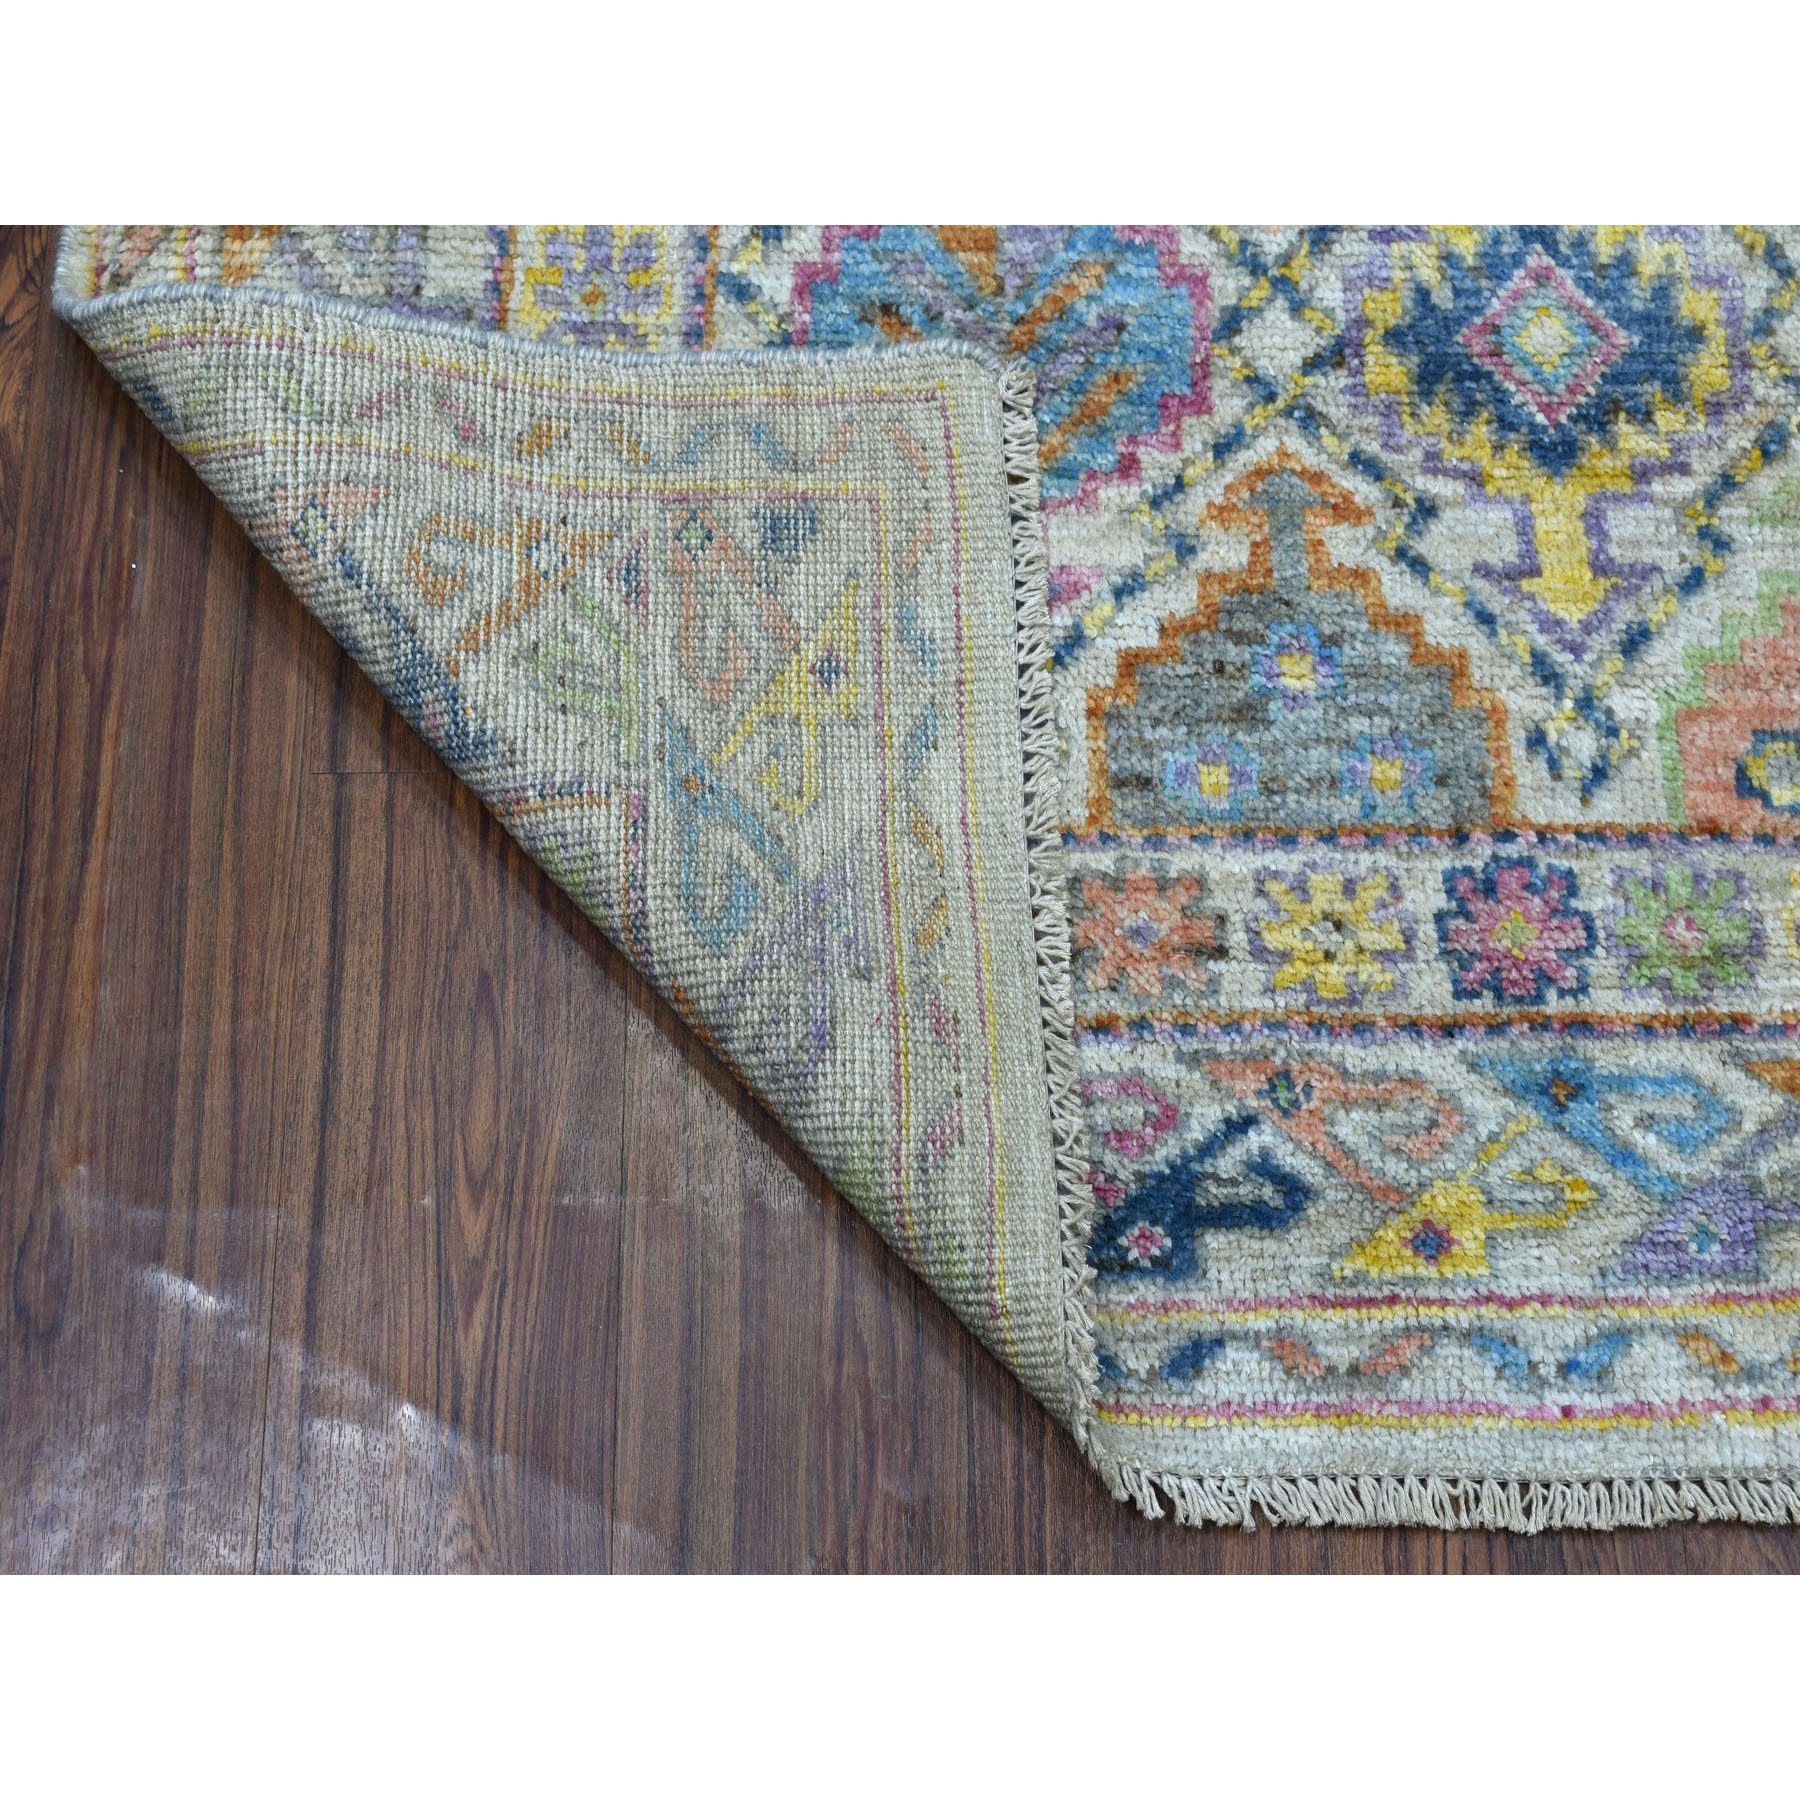 6'10"x4'10" Ivory Tribal Design Colorful Afghan Baluch Hand Woven Pure Wool Oriental Rug 